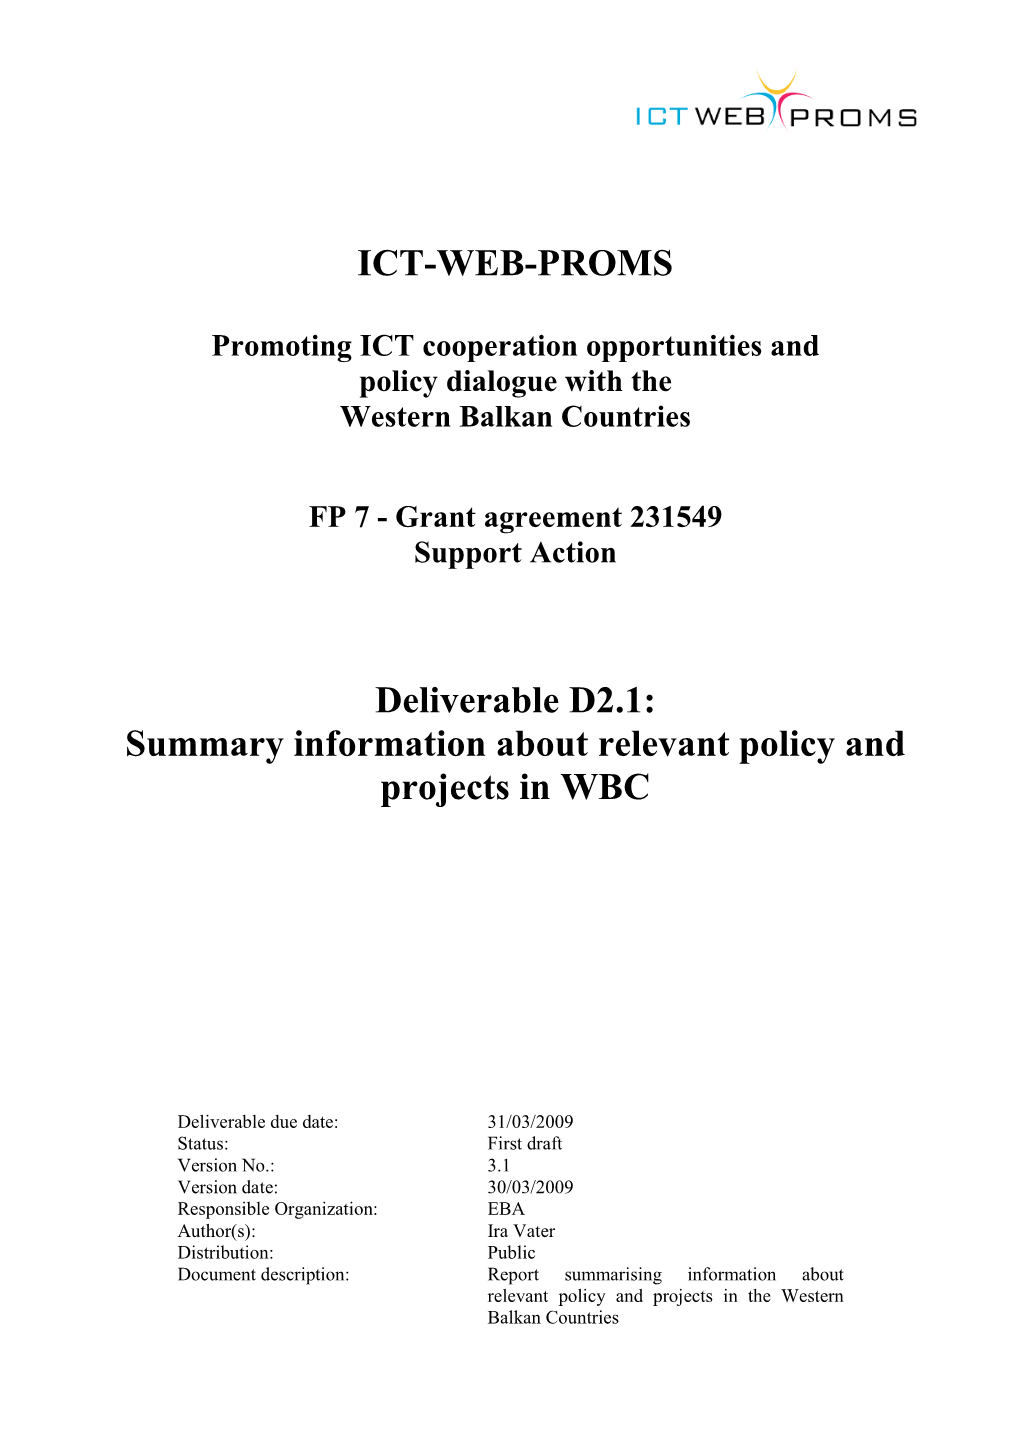 IWP Deliverable